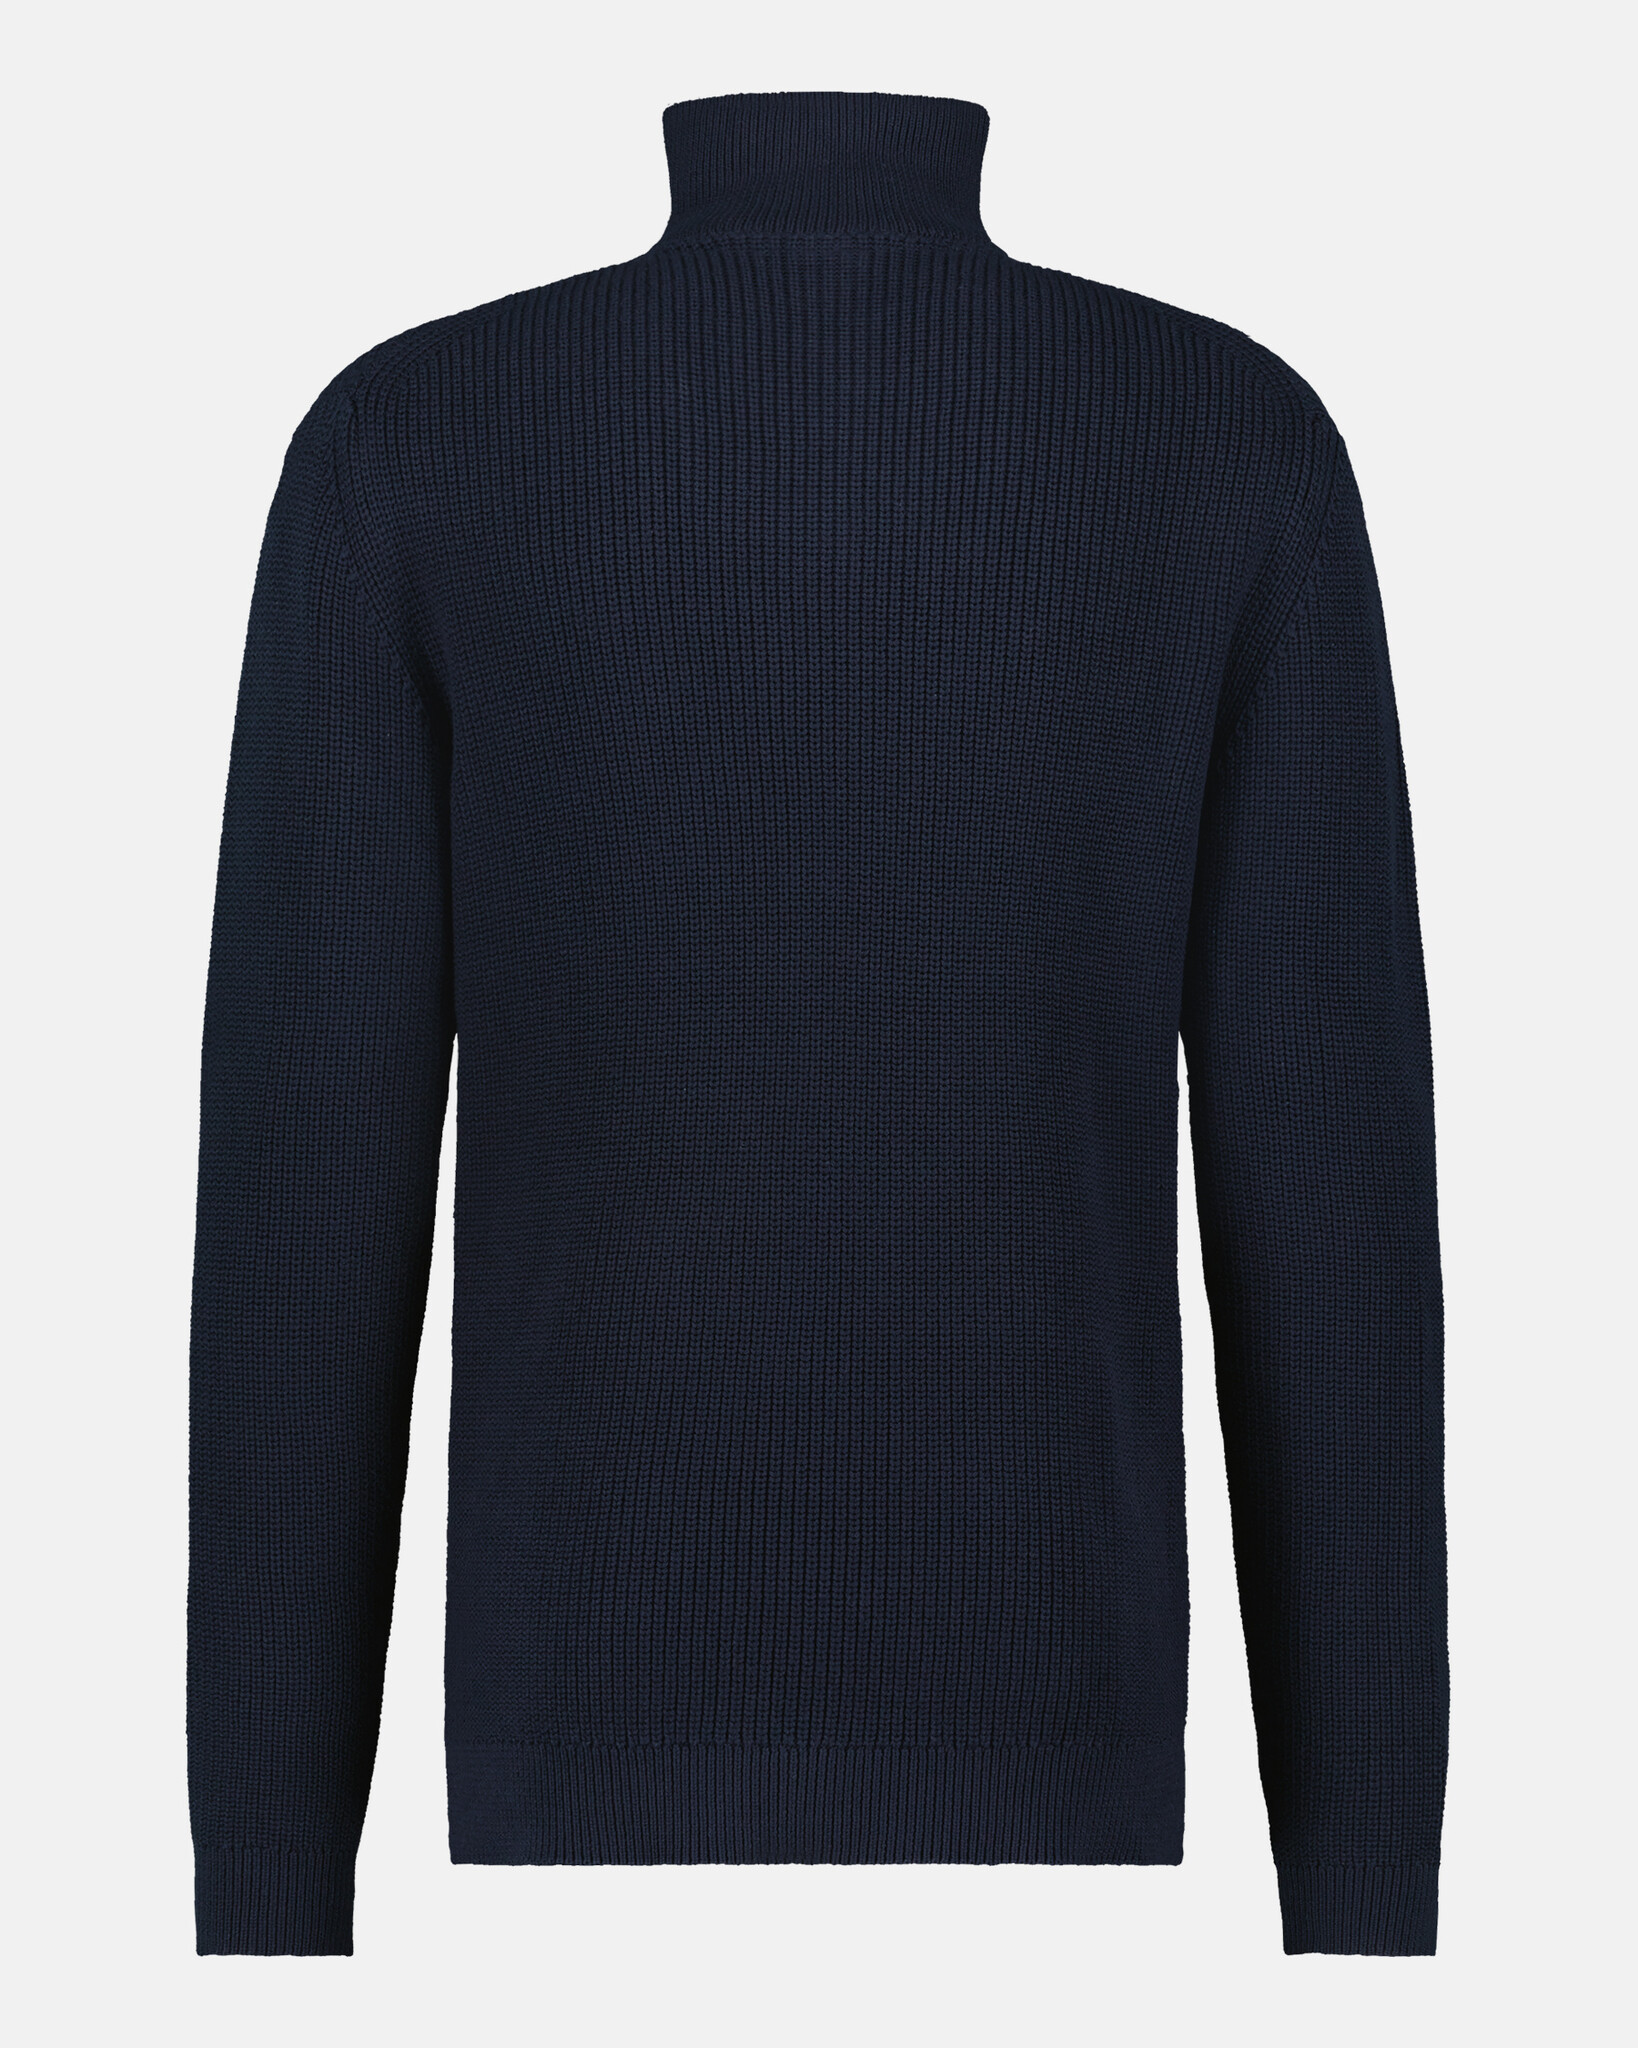 Iconic skipper pullover from 100% cotton